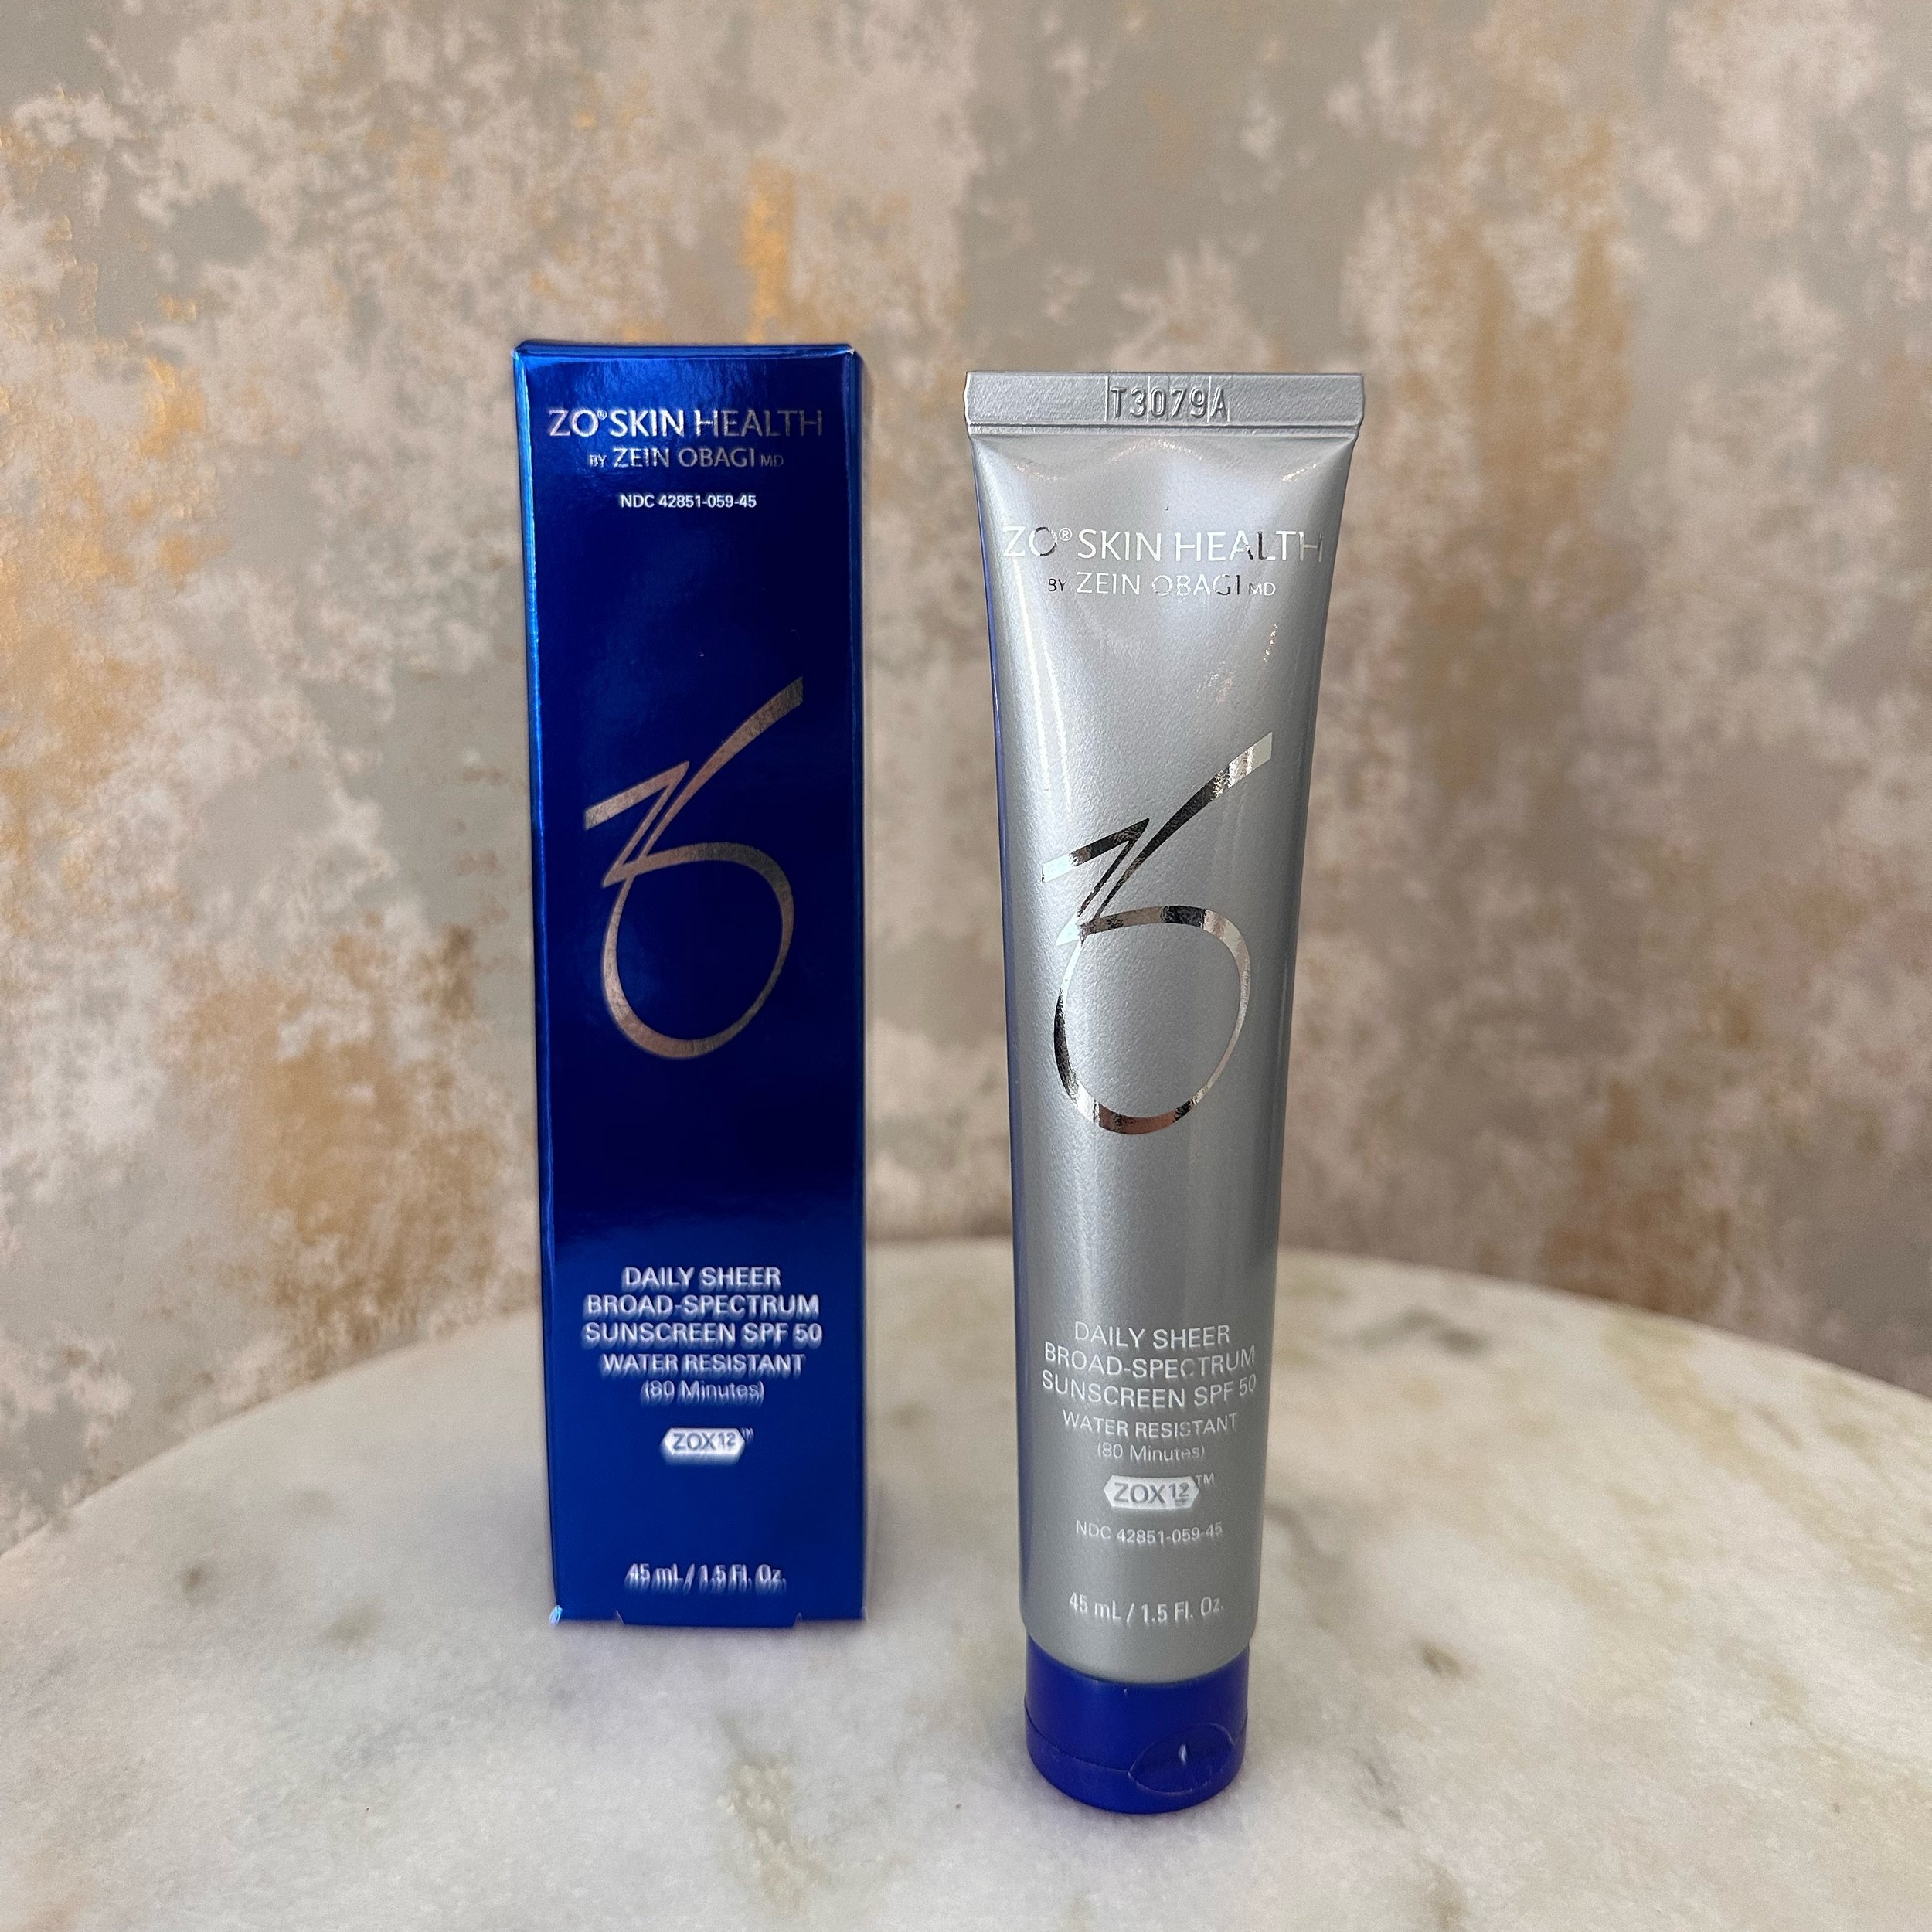 The sun is out ☀️ Summer is around the corner, and skin protection is so important! ZO&rsquo;s daily sheer broad sunscreen is one of our favorites! It is water and perspiration resistant, this non-greasy sunscreen, with ZOX12&deg; complex dries quick